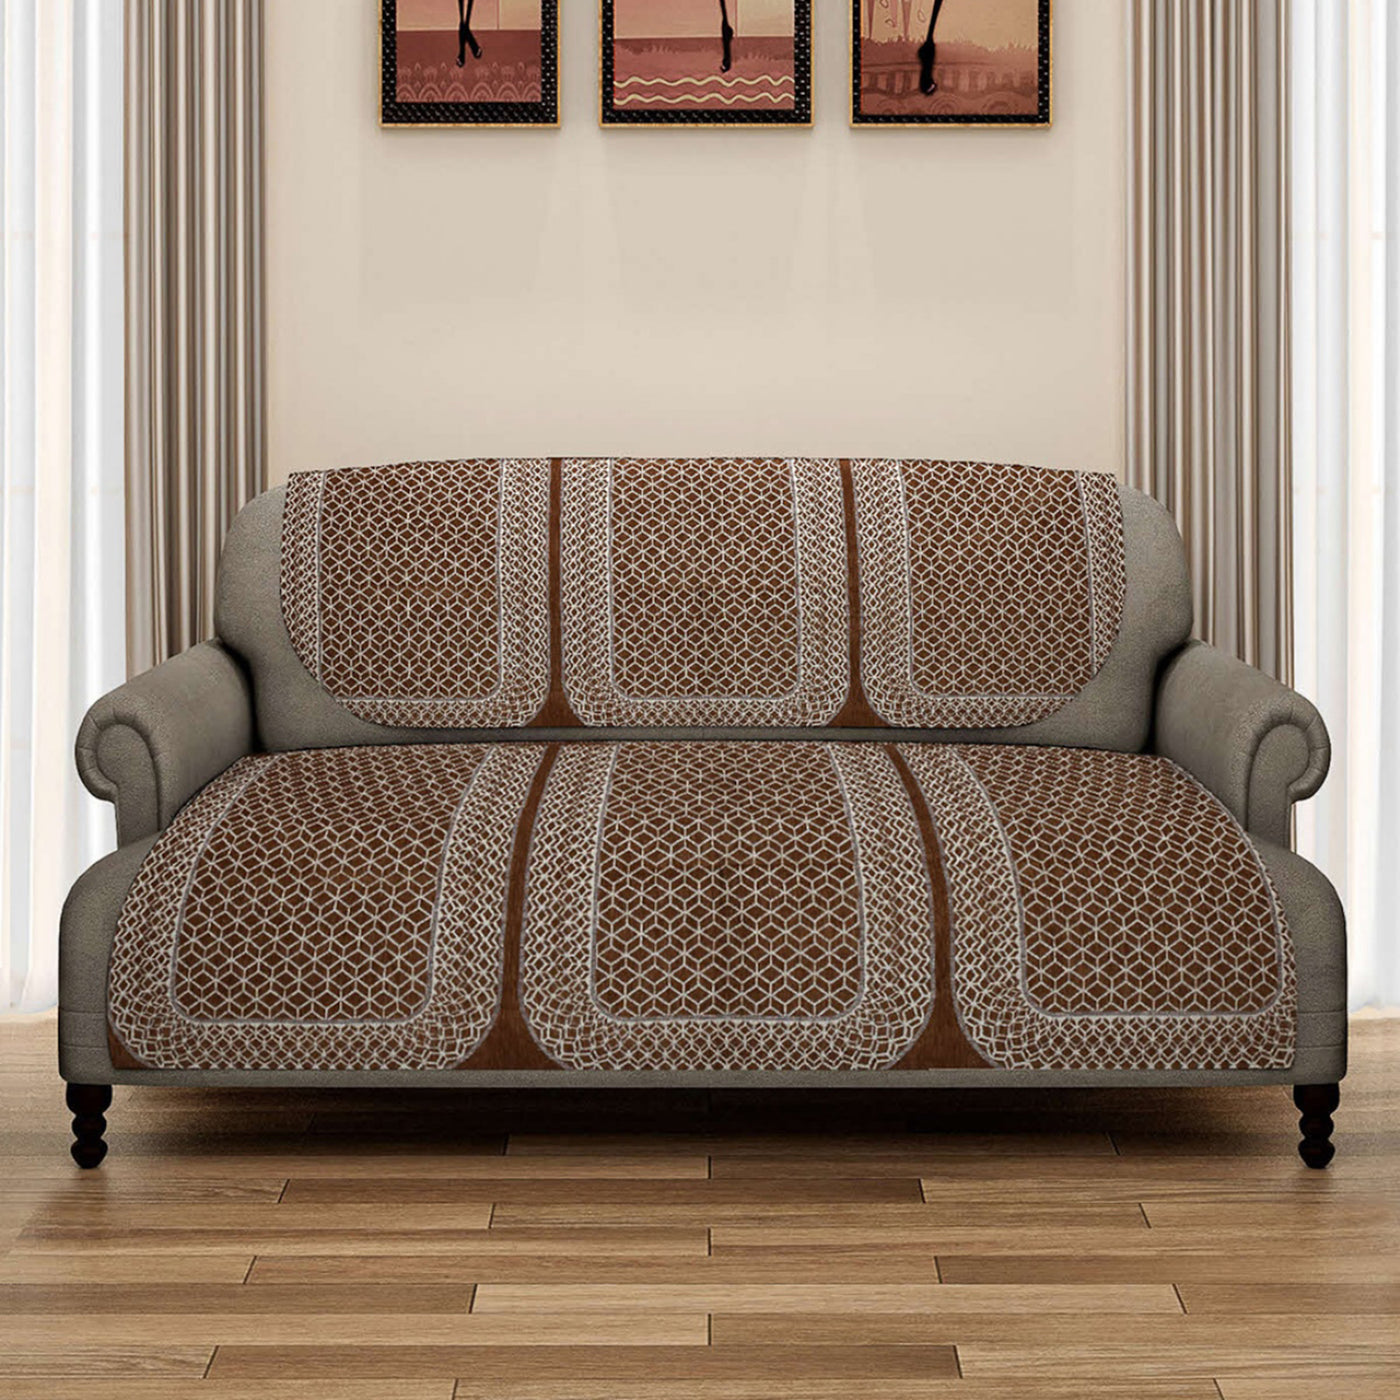 Romee 6-pieces brown geometric patterned 5-seater sofa covers slpss70